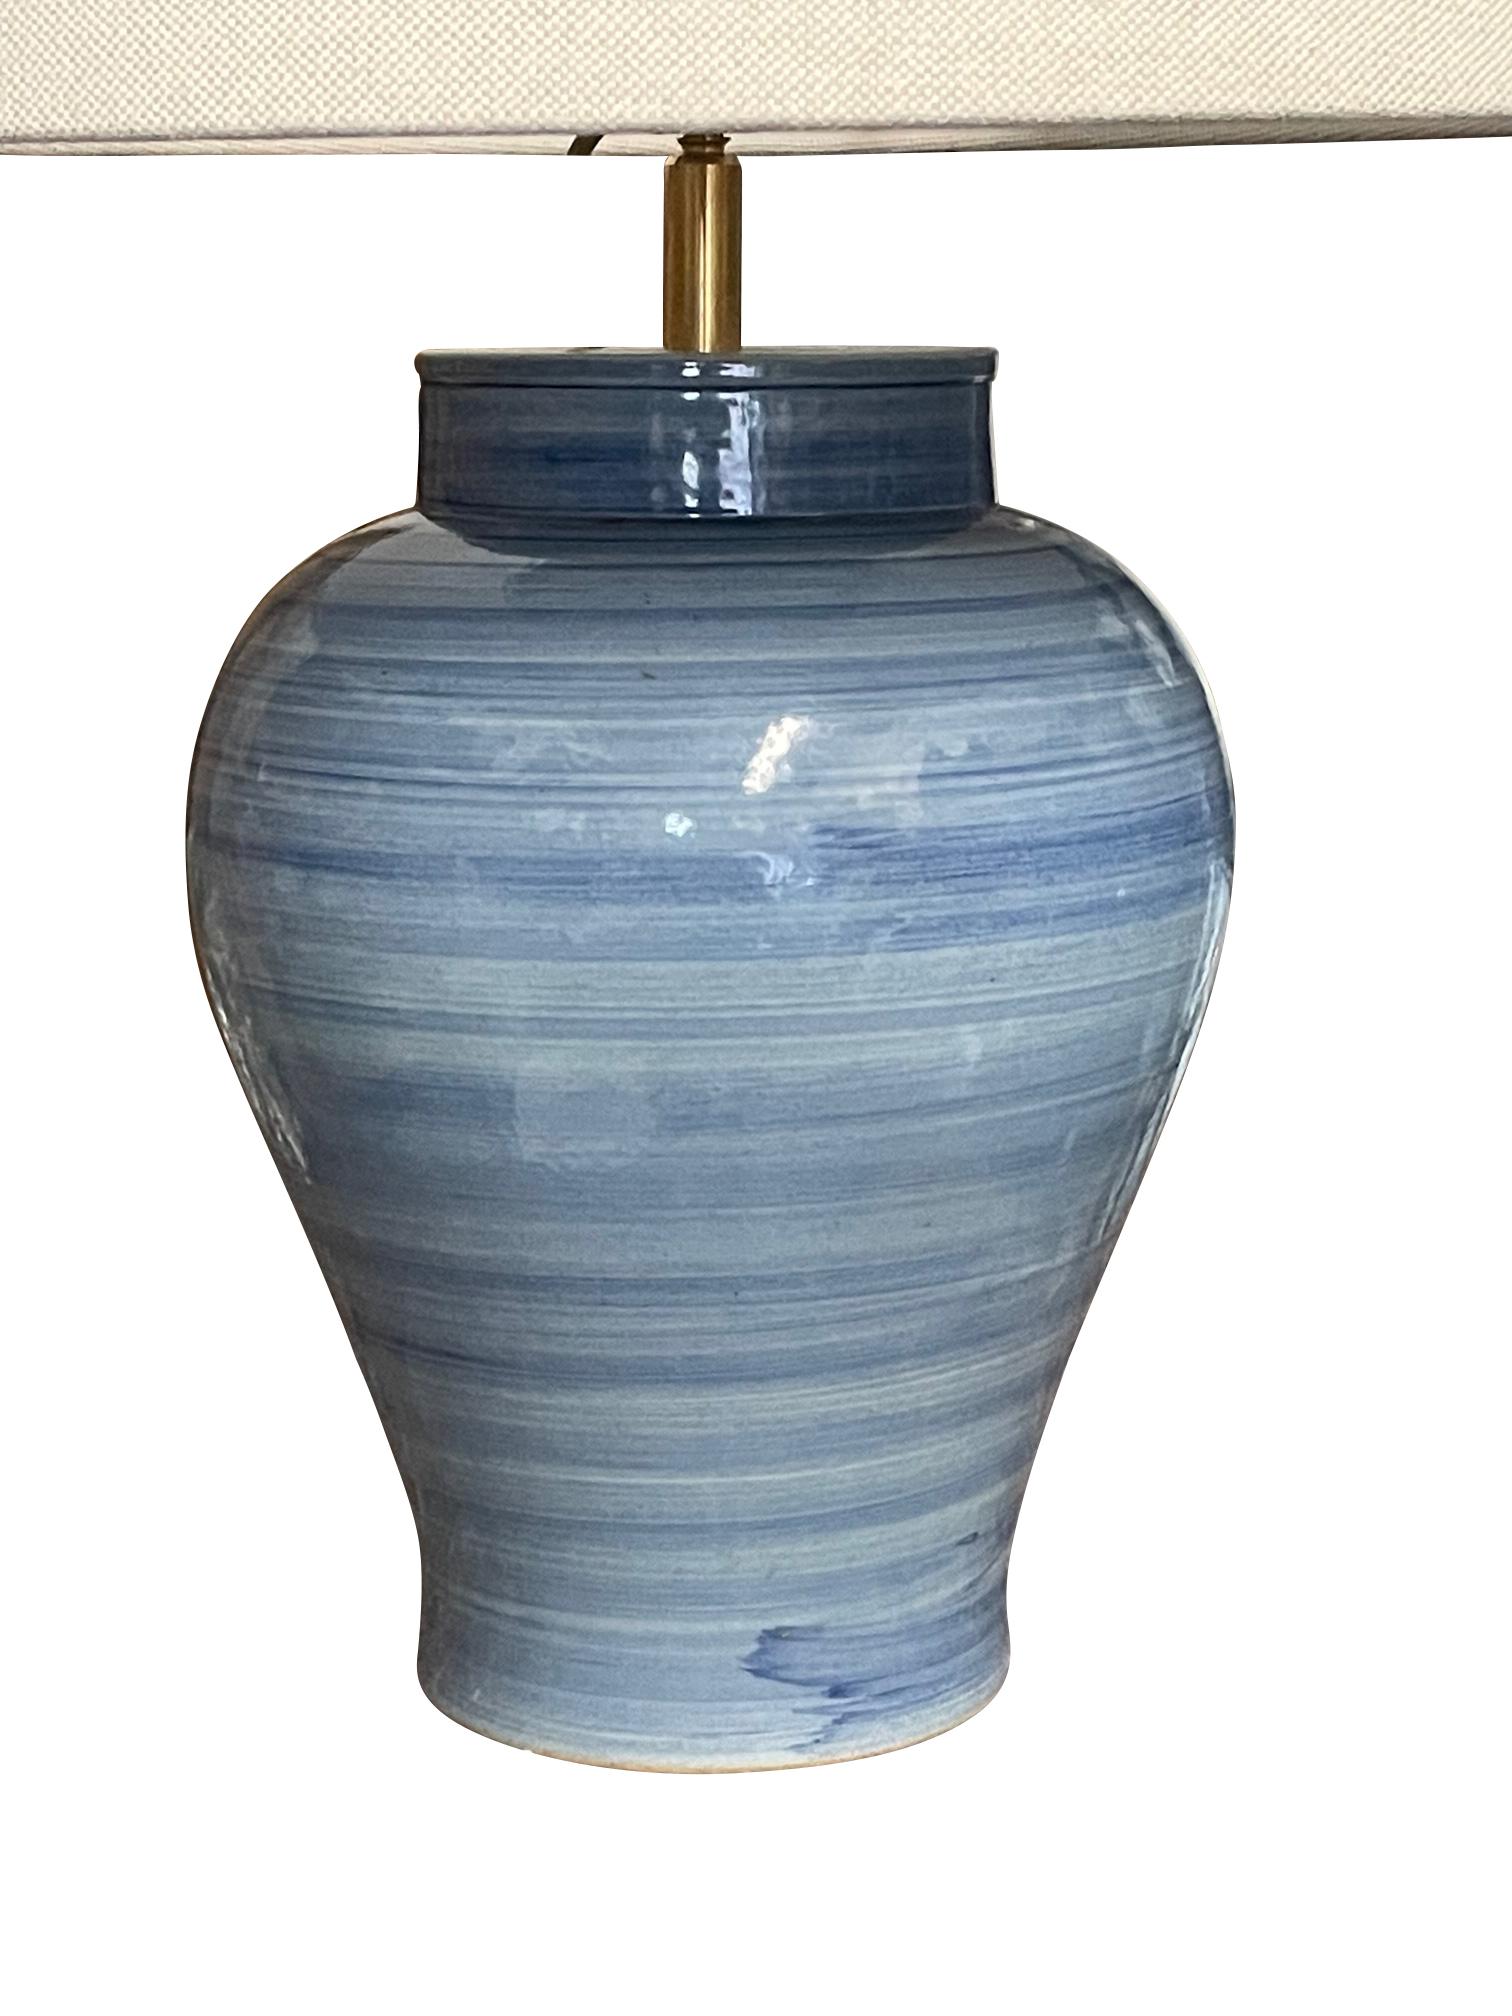 Contemporary Chinese single blue lamp with horizontal striated design.
Ginger jar shape design.
New Belgian linen shades
Newly wired
Overall height. 22